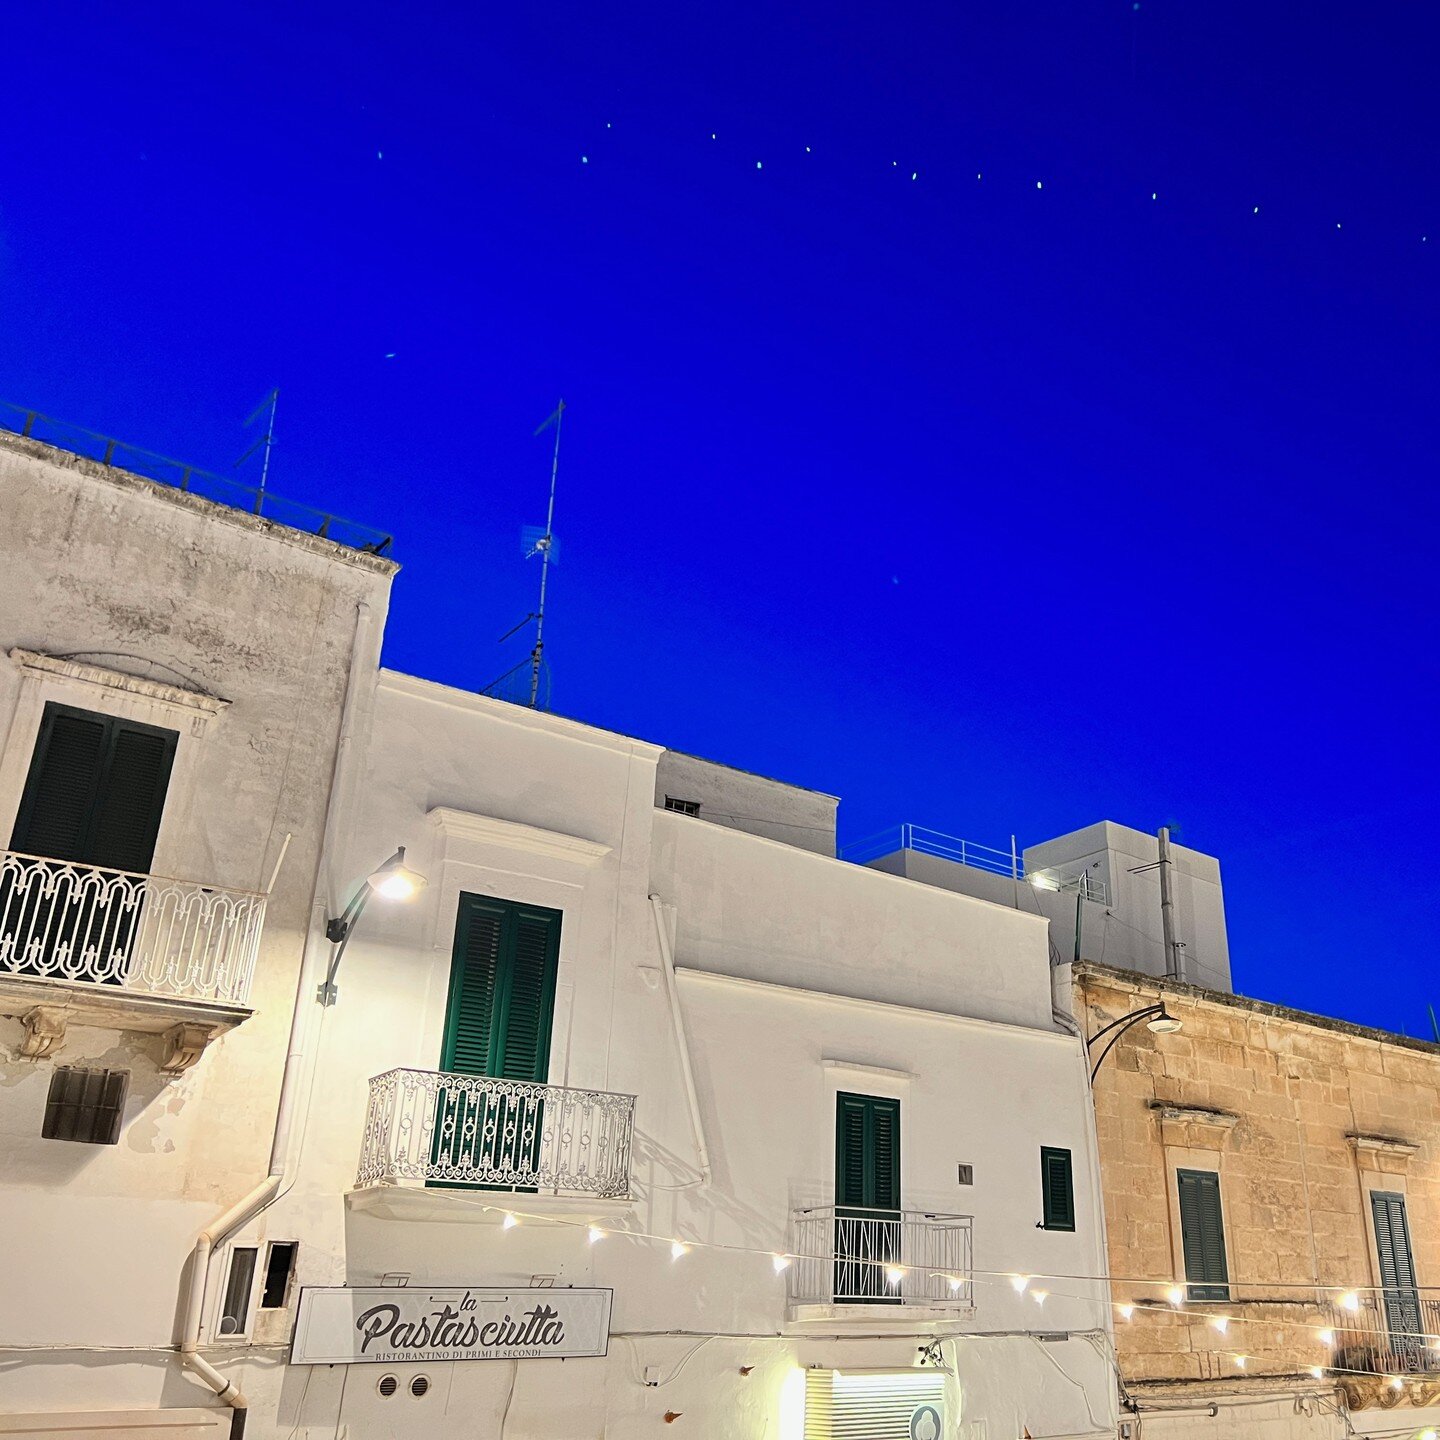 Gorgeous royal blue night sky (no filter) in Ostuni, Italy. We can't wait to return to the Puglia region, it was absolutely magical there!

I want to keep all of my recent indigo dyed fabric and make a small quilt to remind me of this vibrant color a